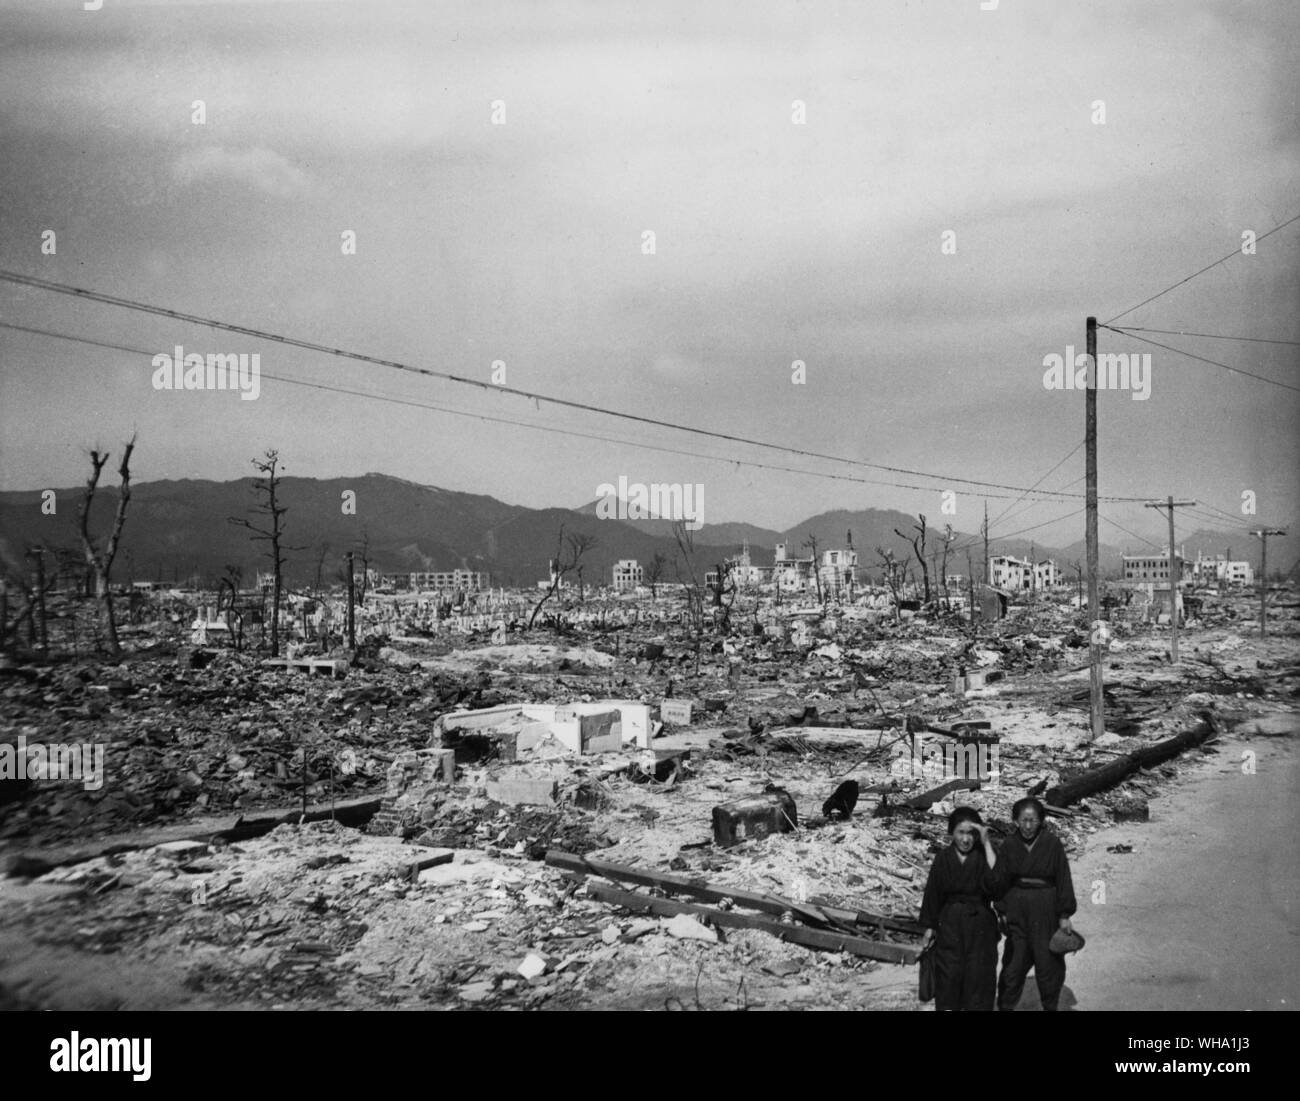 WW2: The atomic bomb damage to Hiroshima, Japan. Bomb dropped by the USA 5th August 1945. Stock Photo